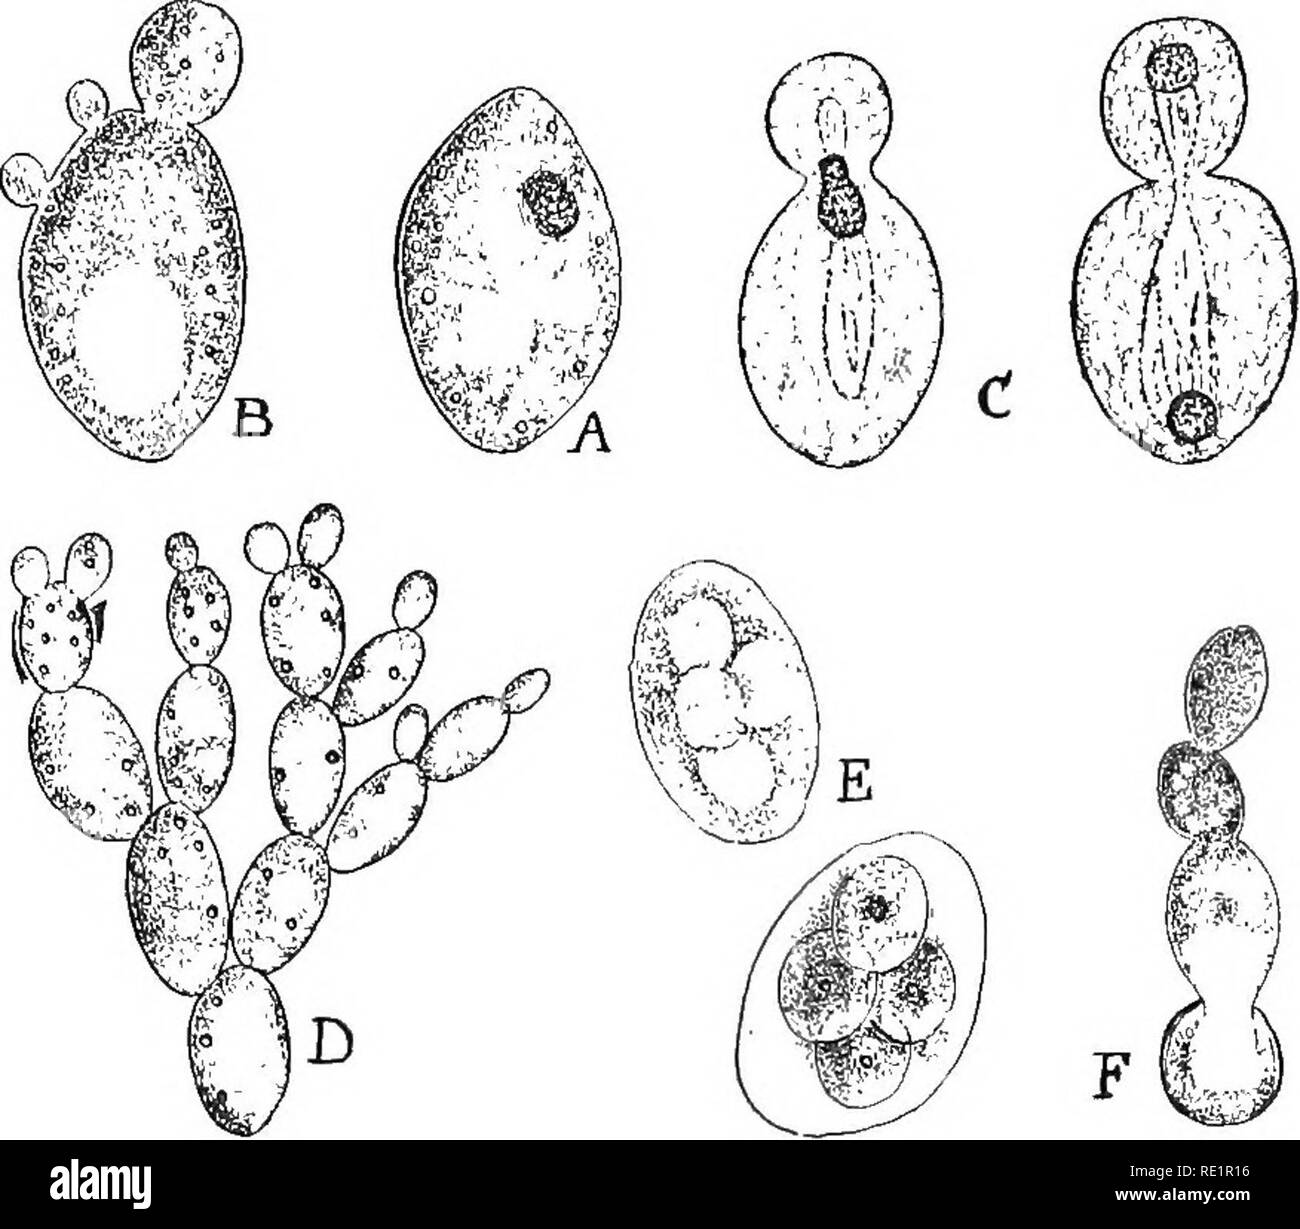 . Nature and development of plants. Botany. DEVELOPMENT OF PLANTS 249 freed by the decay of the ascus and when conditions are favorable grow into the characteristic yeast cells, as shown in Fig. 161, F. (a) Fermentation.—These microscopic plants must be num- bered among those plants that are of the greatest economic value. Their importance is due to the fact that they decompose sugars upon which they feed into CO2 and alcohol, a change called fer- mentation. The extensive brewing and distilling industries all. Fig. 161. The yeast plant, Saccharomyces: A, single plant, B, plant producing three  Stock Photo